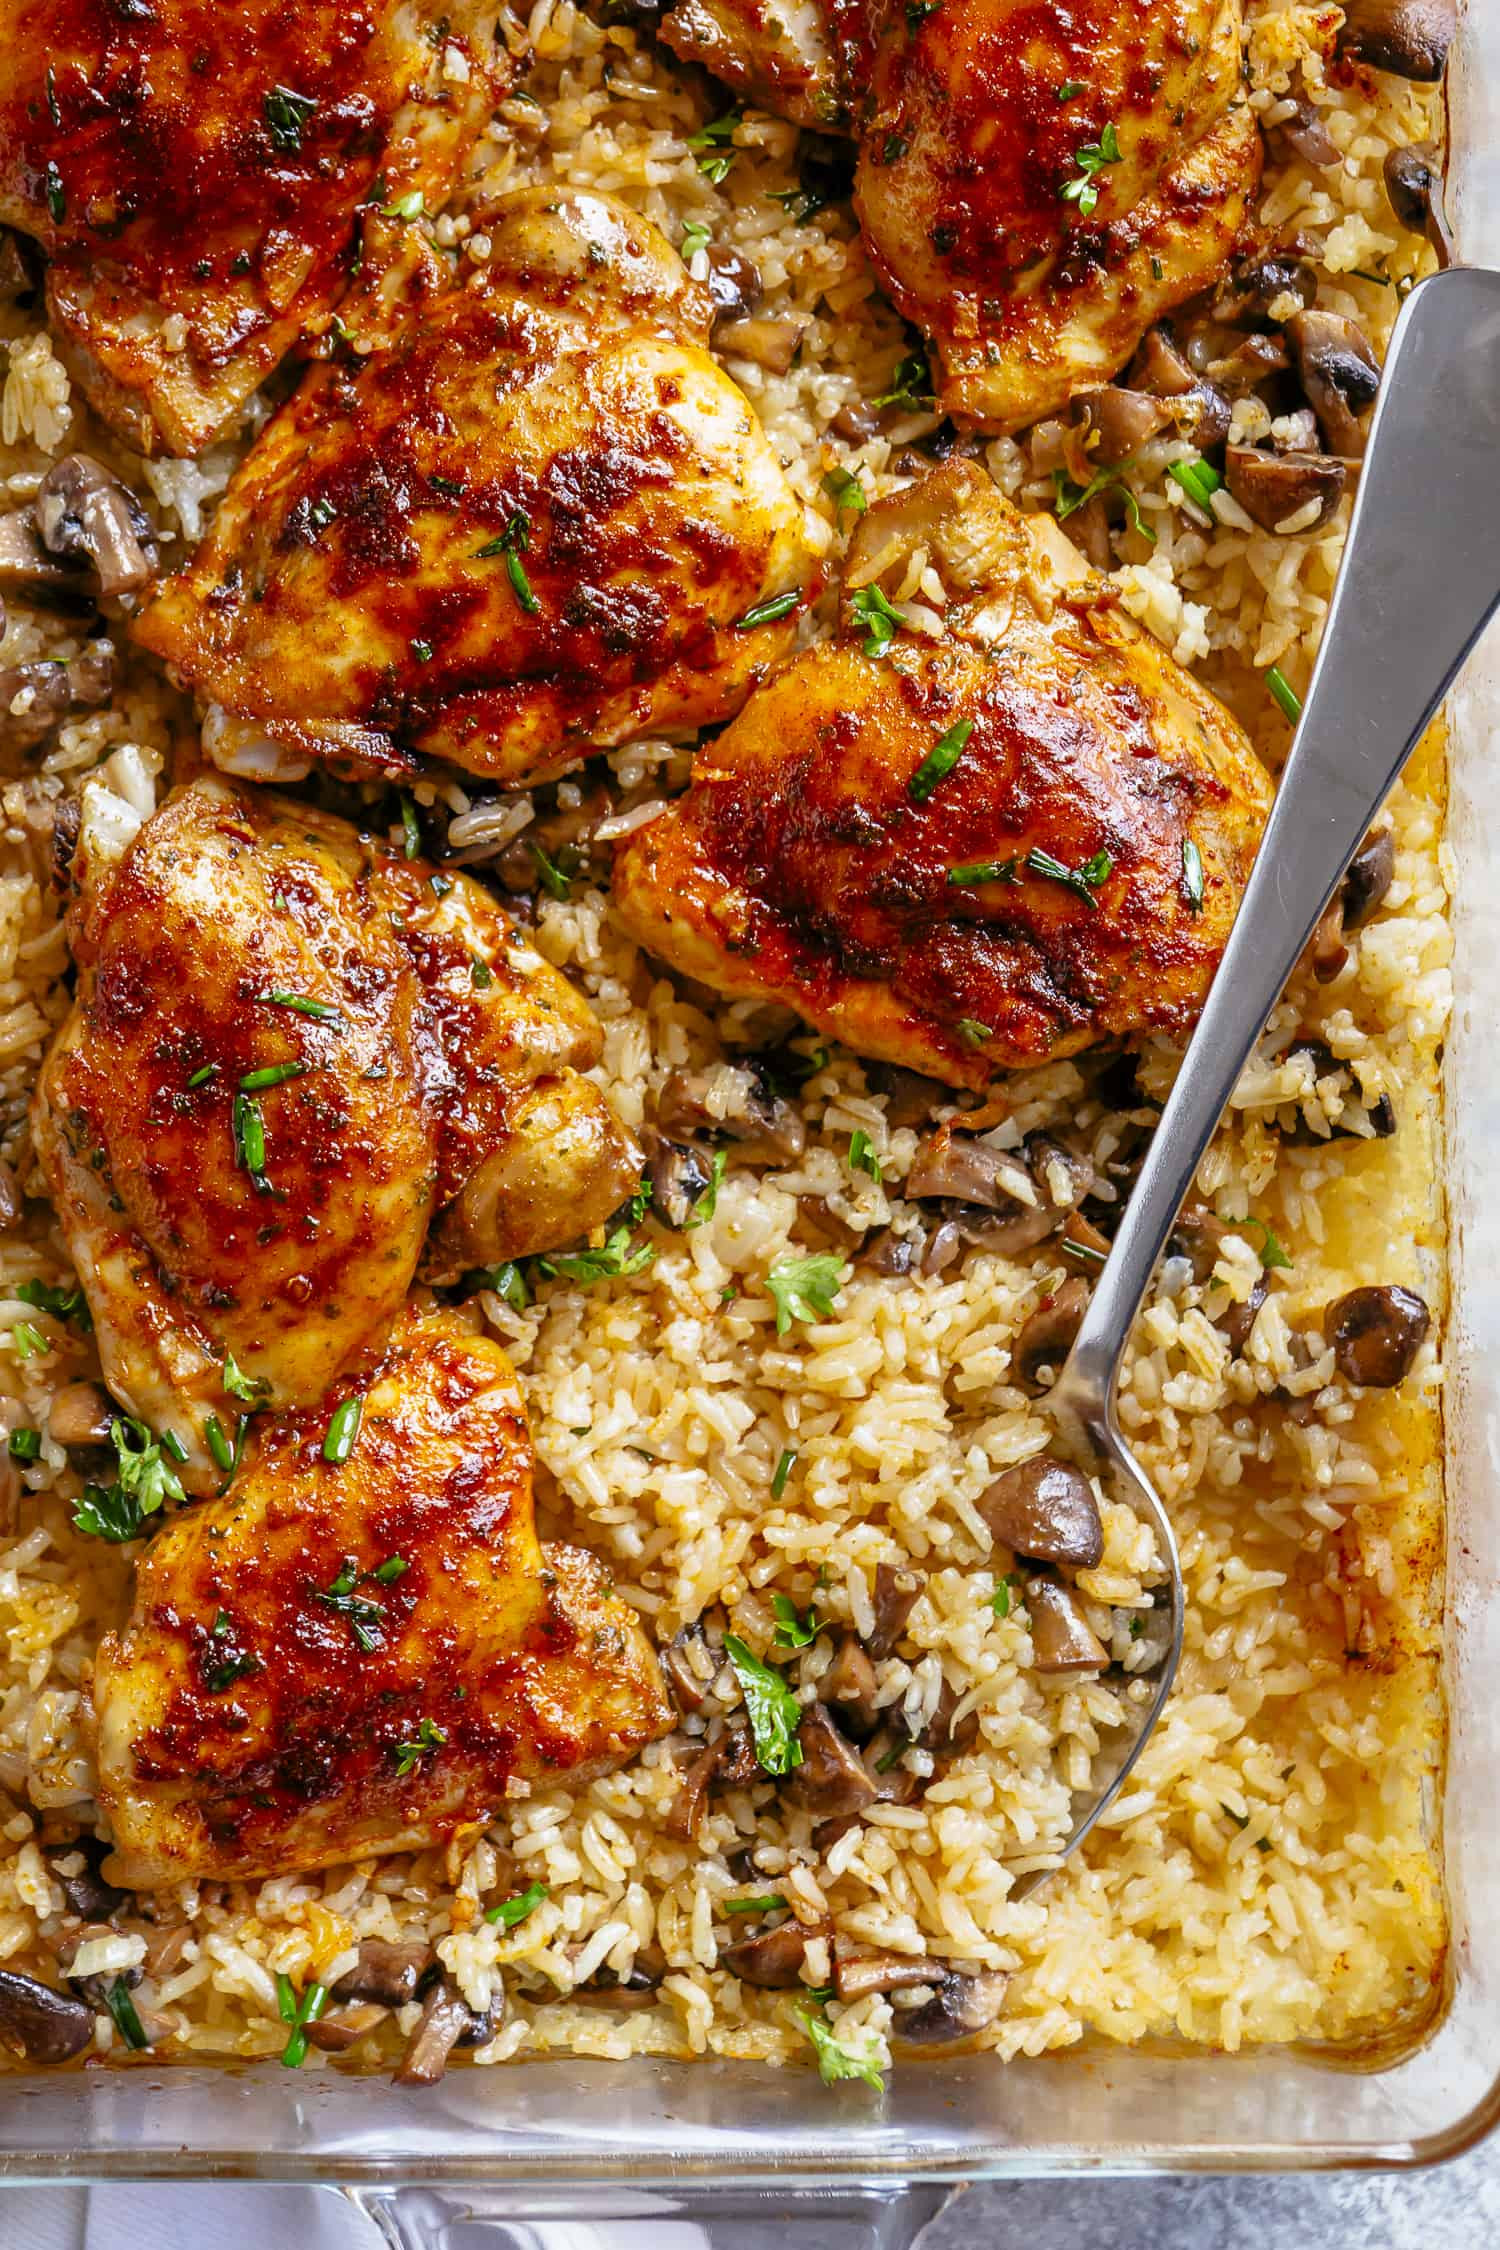 Oven Baked Chicken Recipe
 Oven Baked Chicken And Rice Cafe Delites